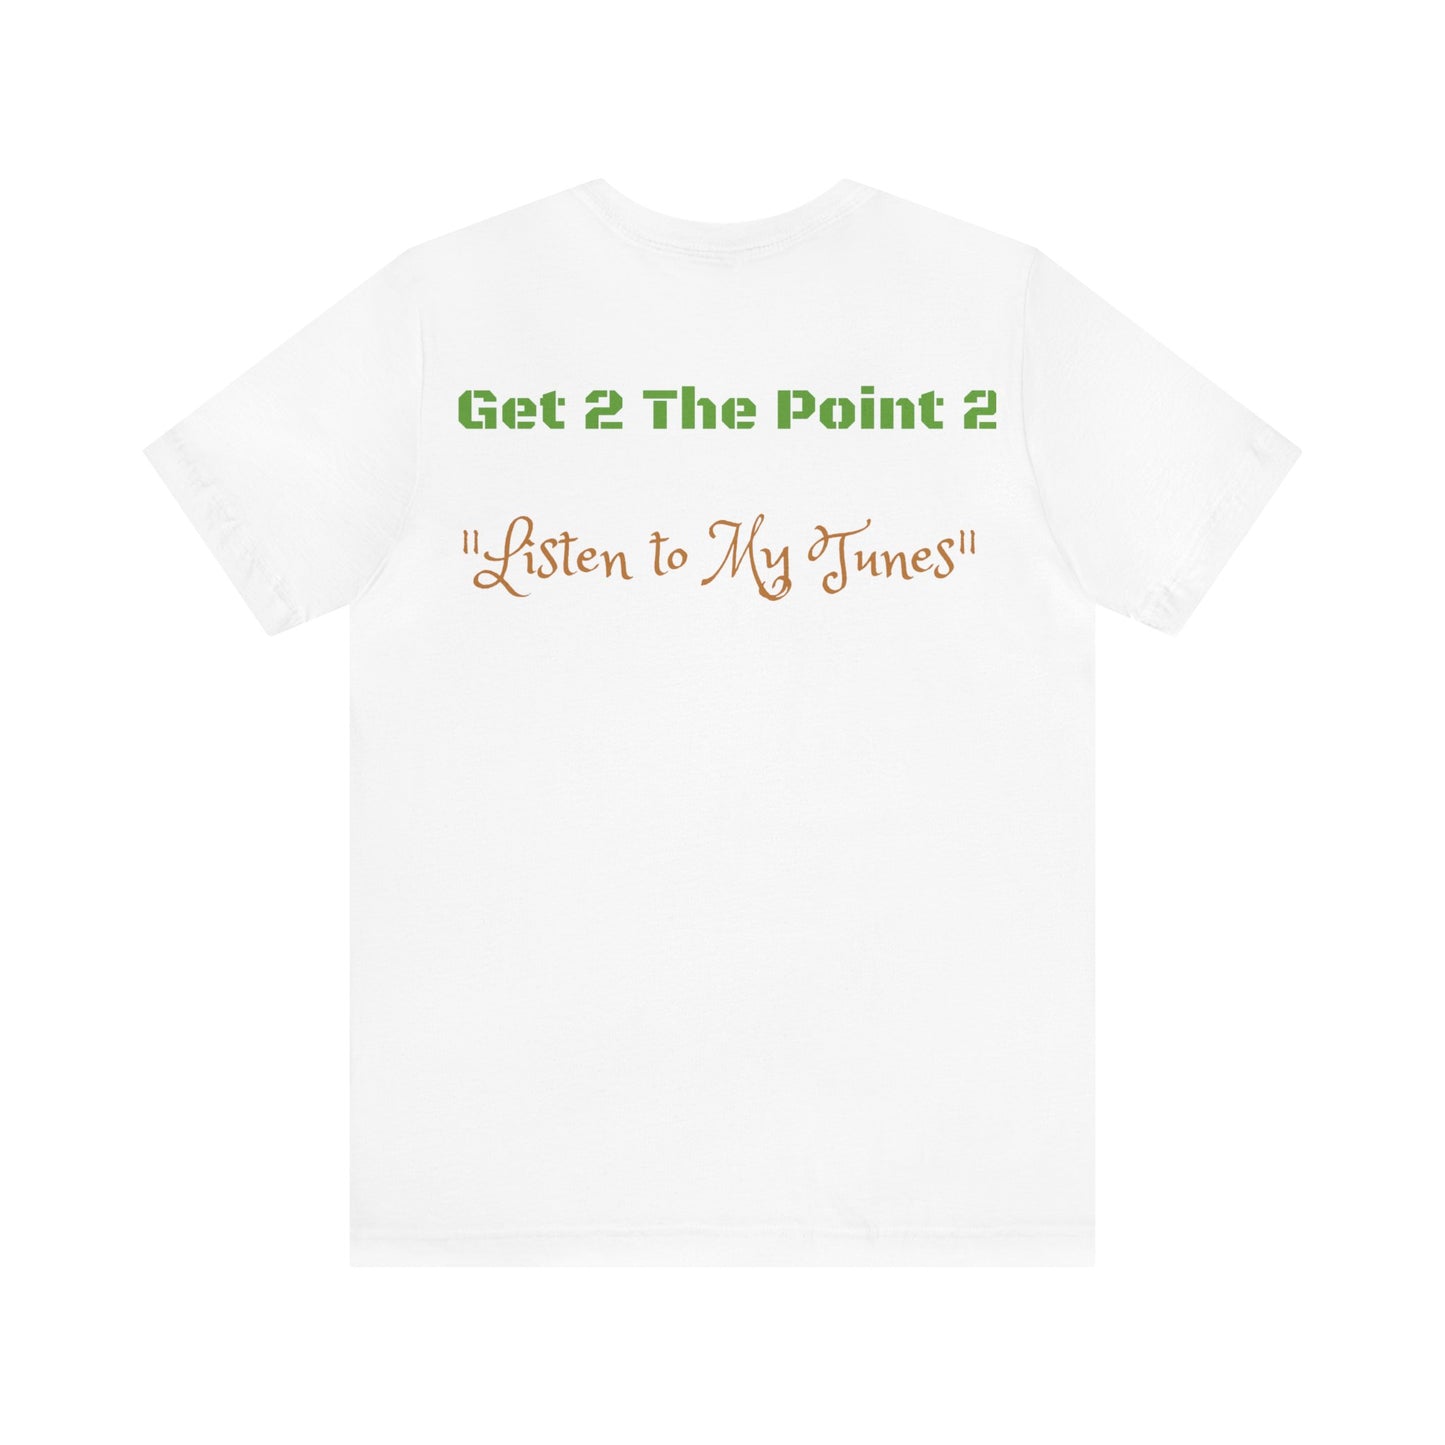 On~Point Apparel